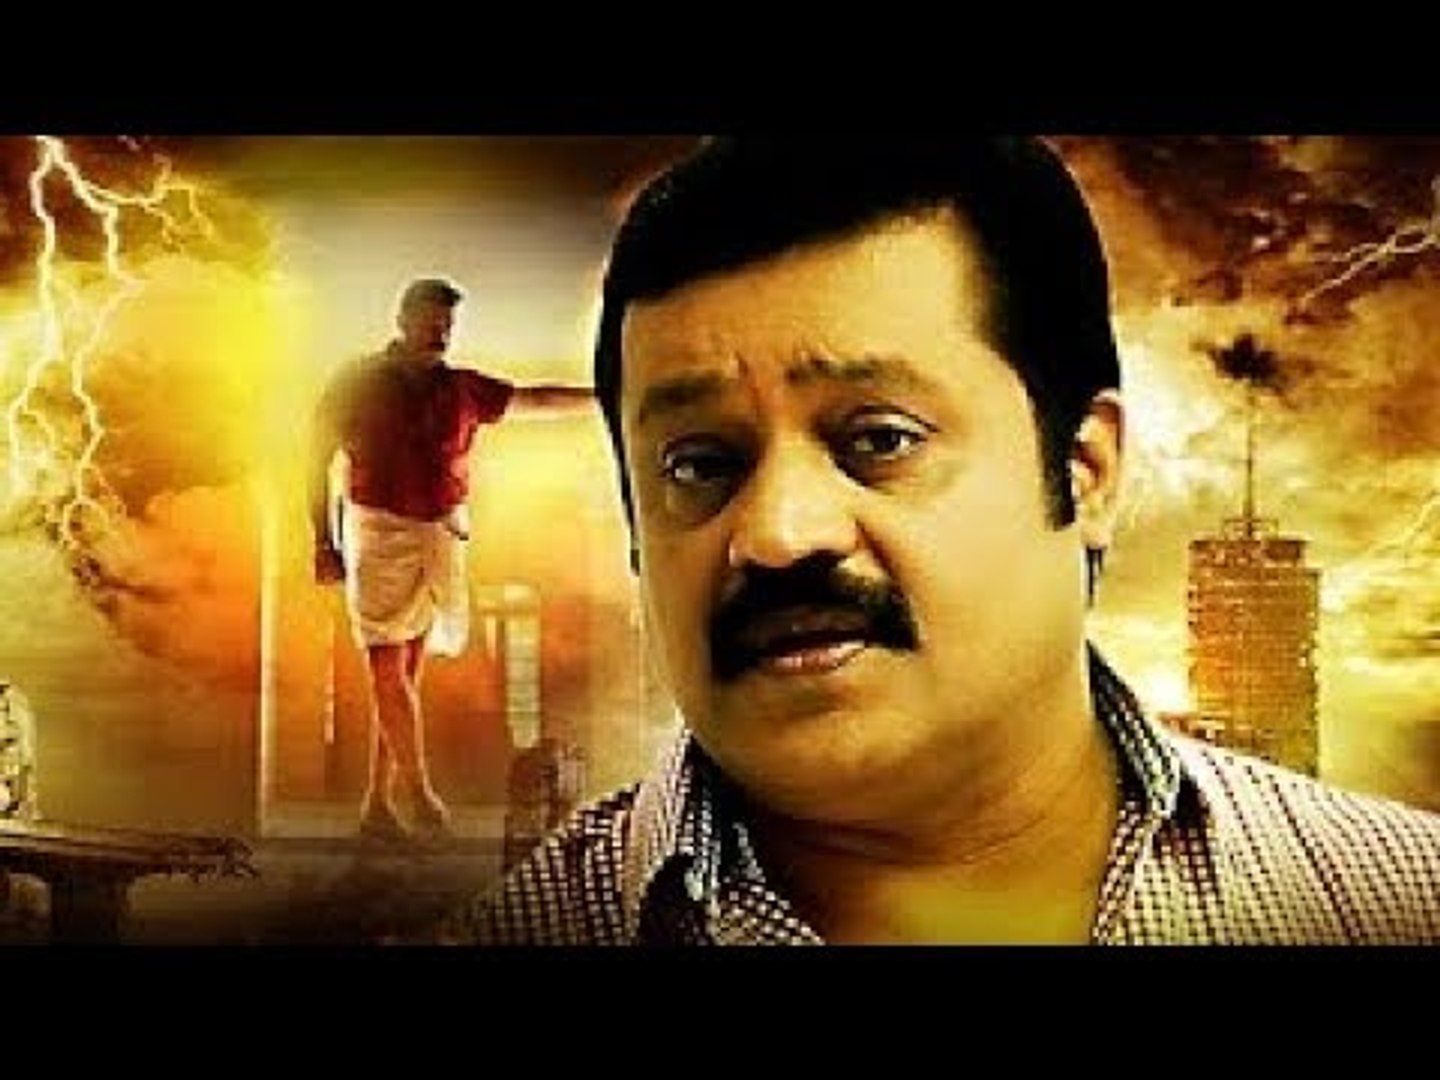 South Indian Movies Dubbed in Hindi Full Movie 2017 | Hindi Action Dubbed Movies 2017